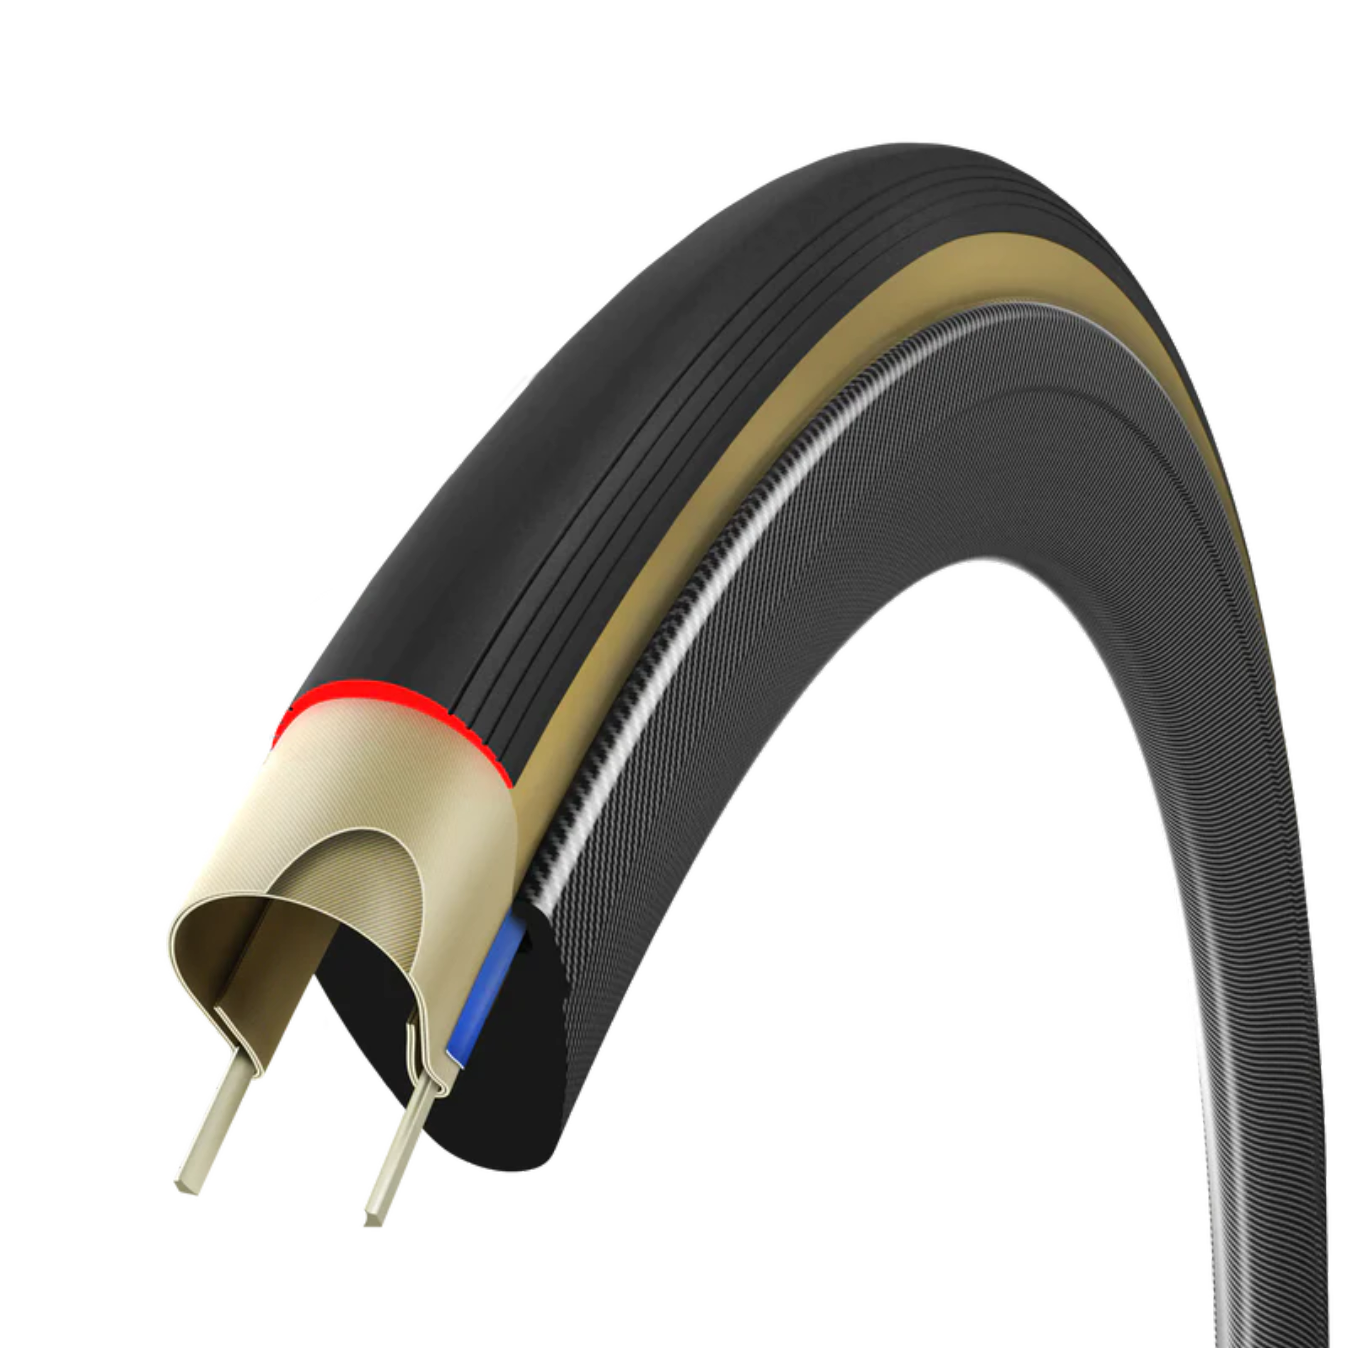 The construction of the Vittoria Corsa Pro Speed leads to some performance upgrades